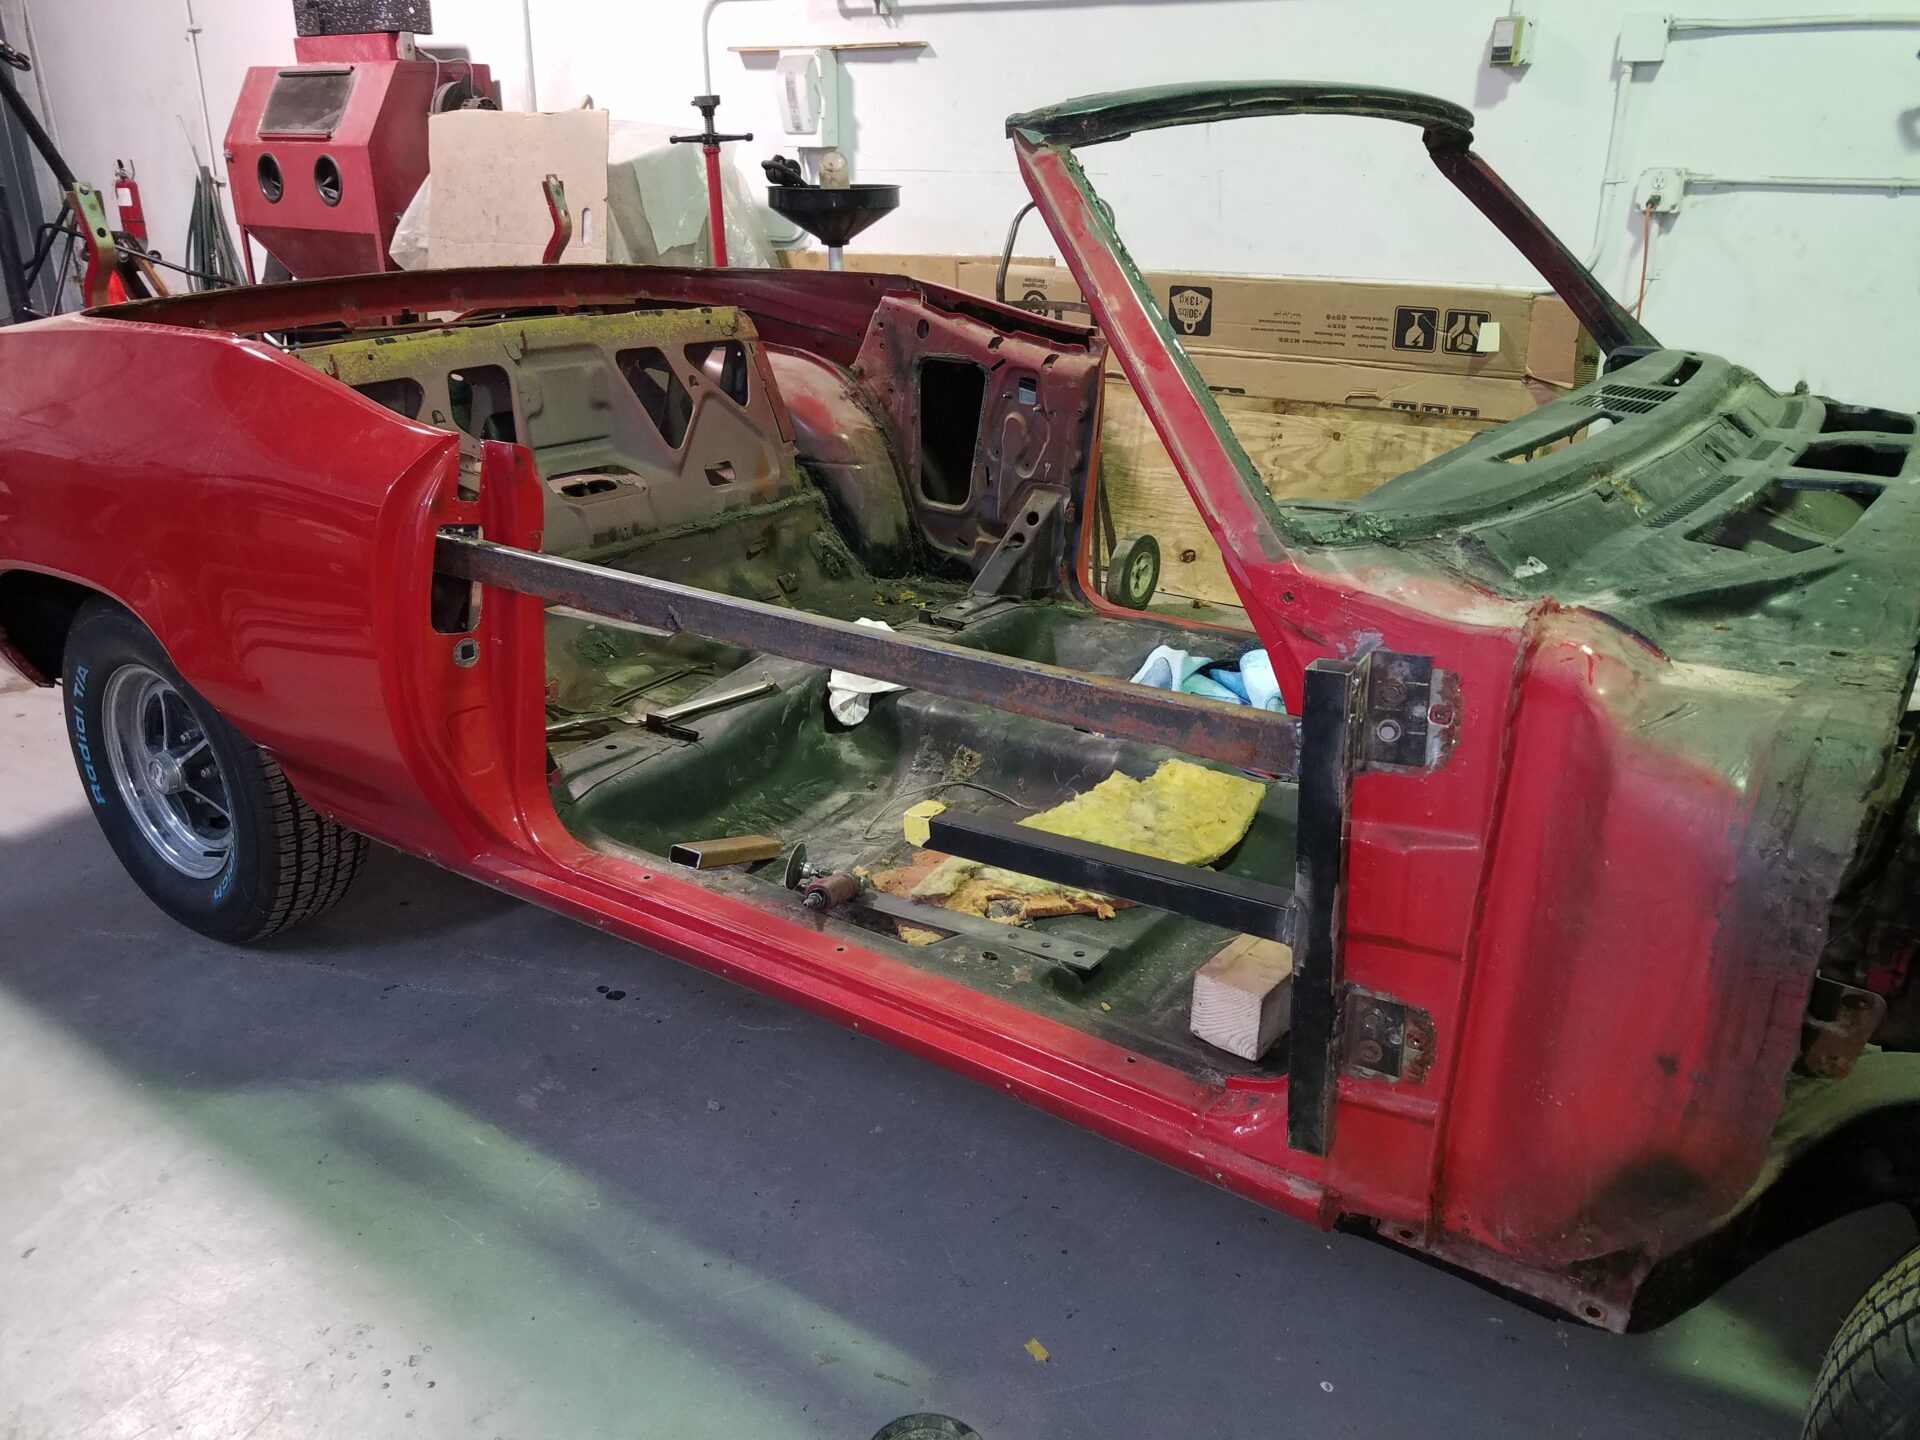 A disassembled 1972 Buick GS Convertible